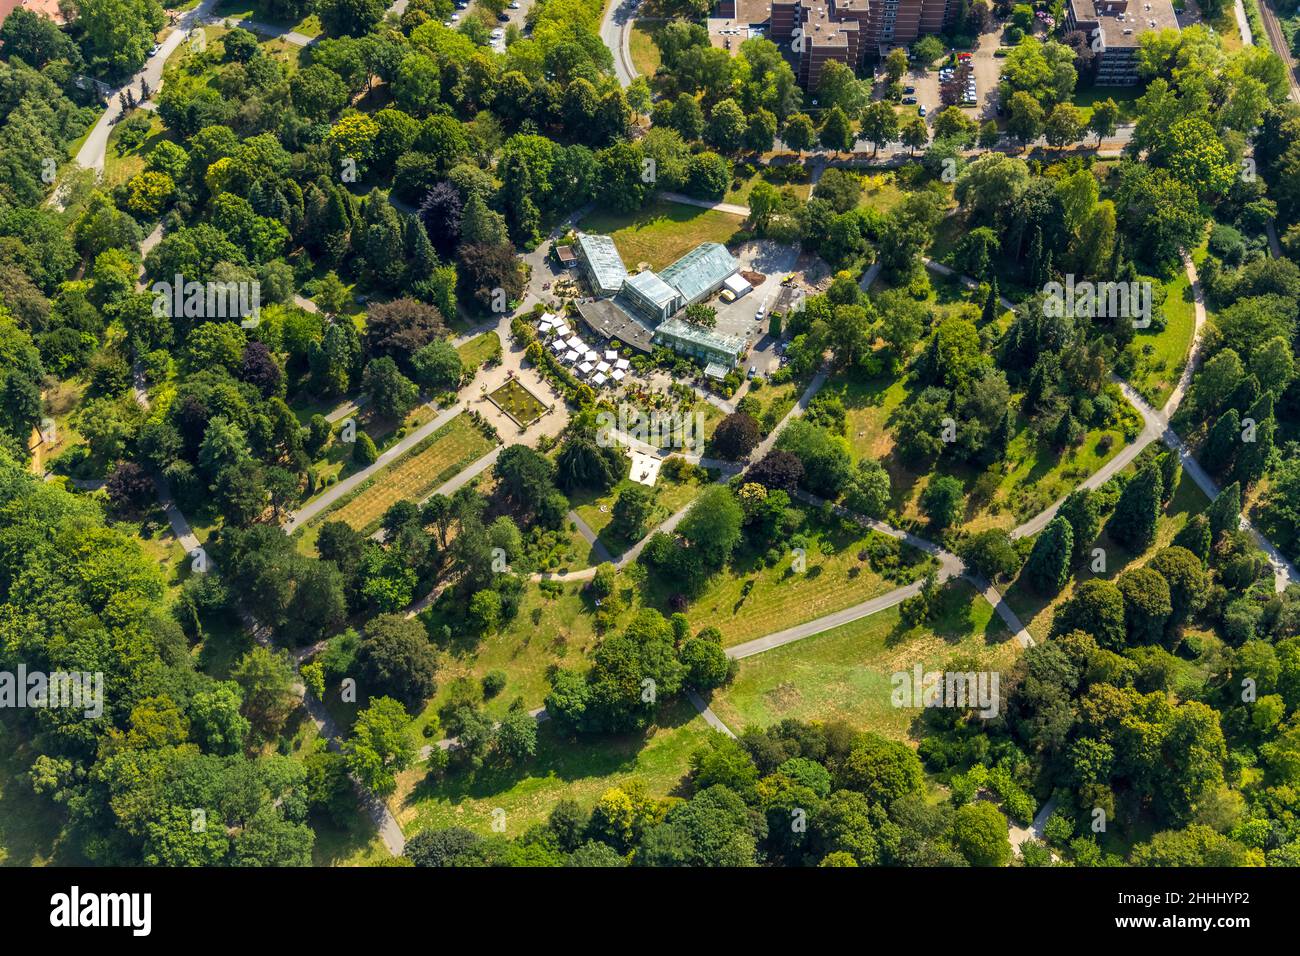 Aerial view, plant show houses and "Café Orchidee" at Dortmund Zoo, Rombergpark, Dortmund, North Rhine-Westphalia, Germany, aerial photograph, aerial Stock Photo